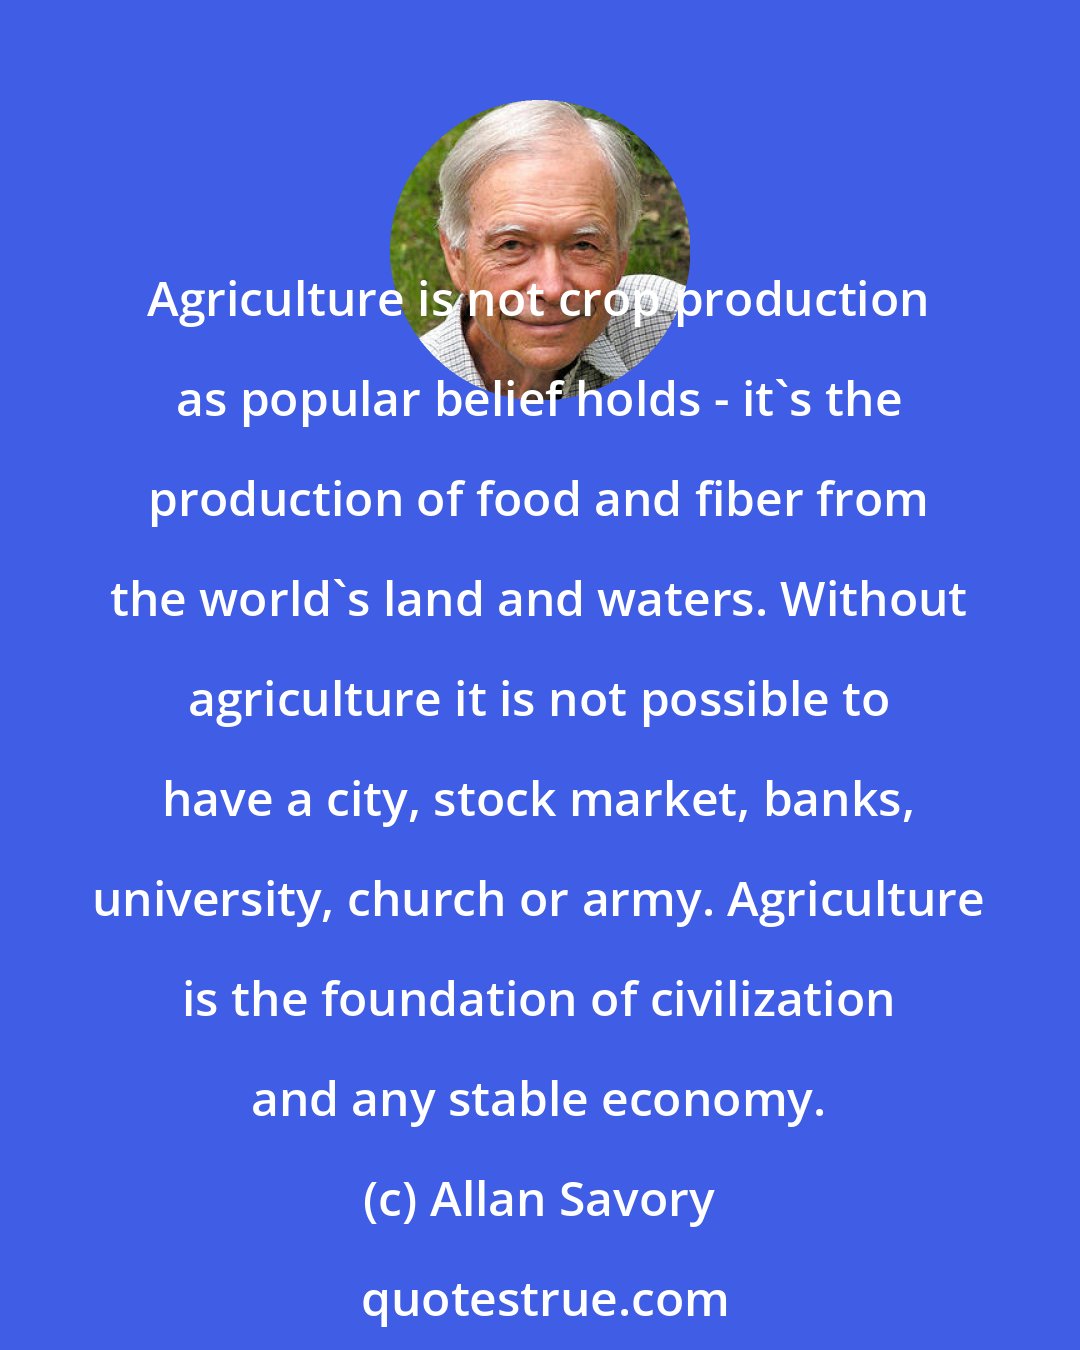 Allan Savory: Agriculture is not crop production as popular belief holds - it's the production of food and fiber from the world's land and waters. Without agriculture it is not possible to have a city, stock market, banks, university, church or army. Agriculture is the foundation of civilization and any stable economy.